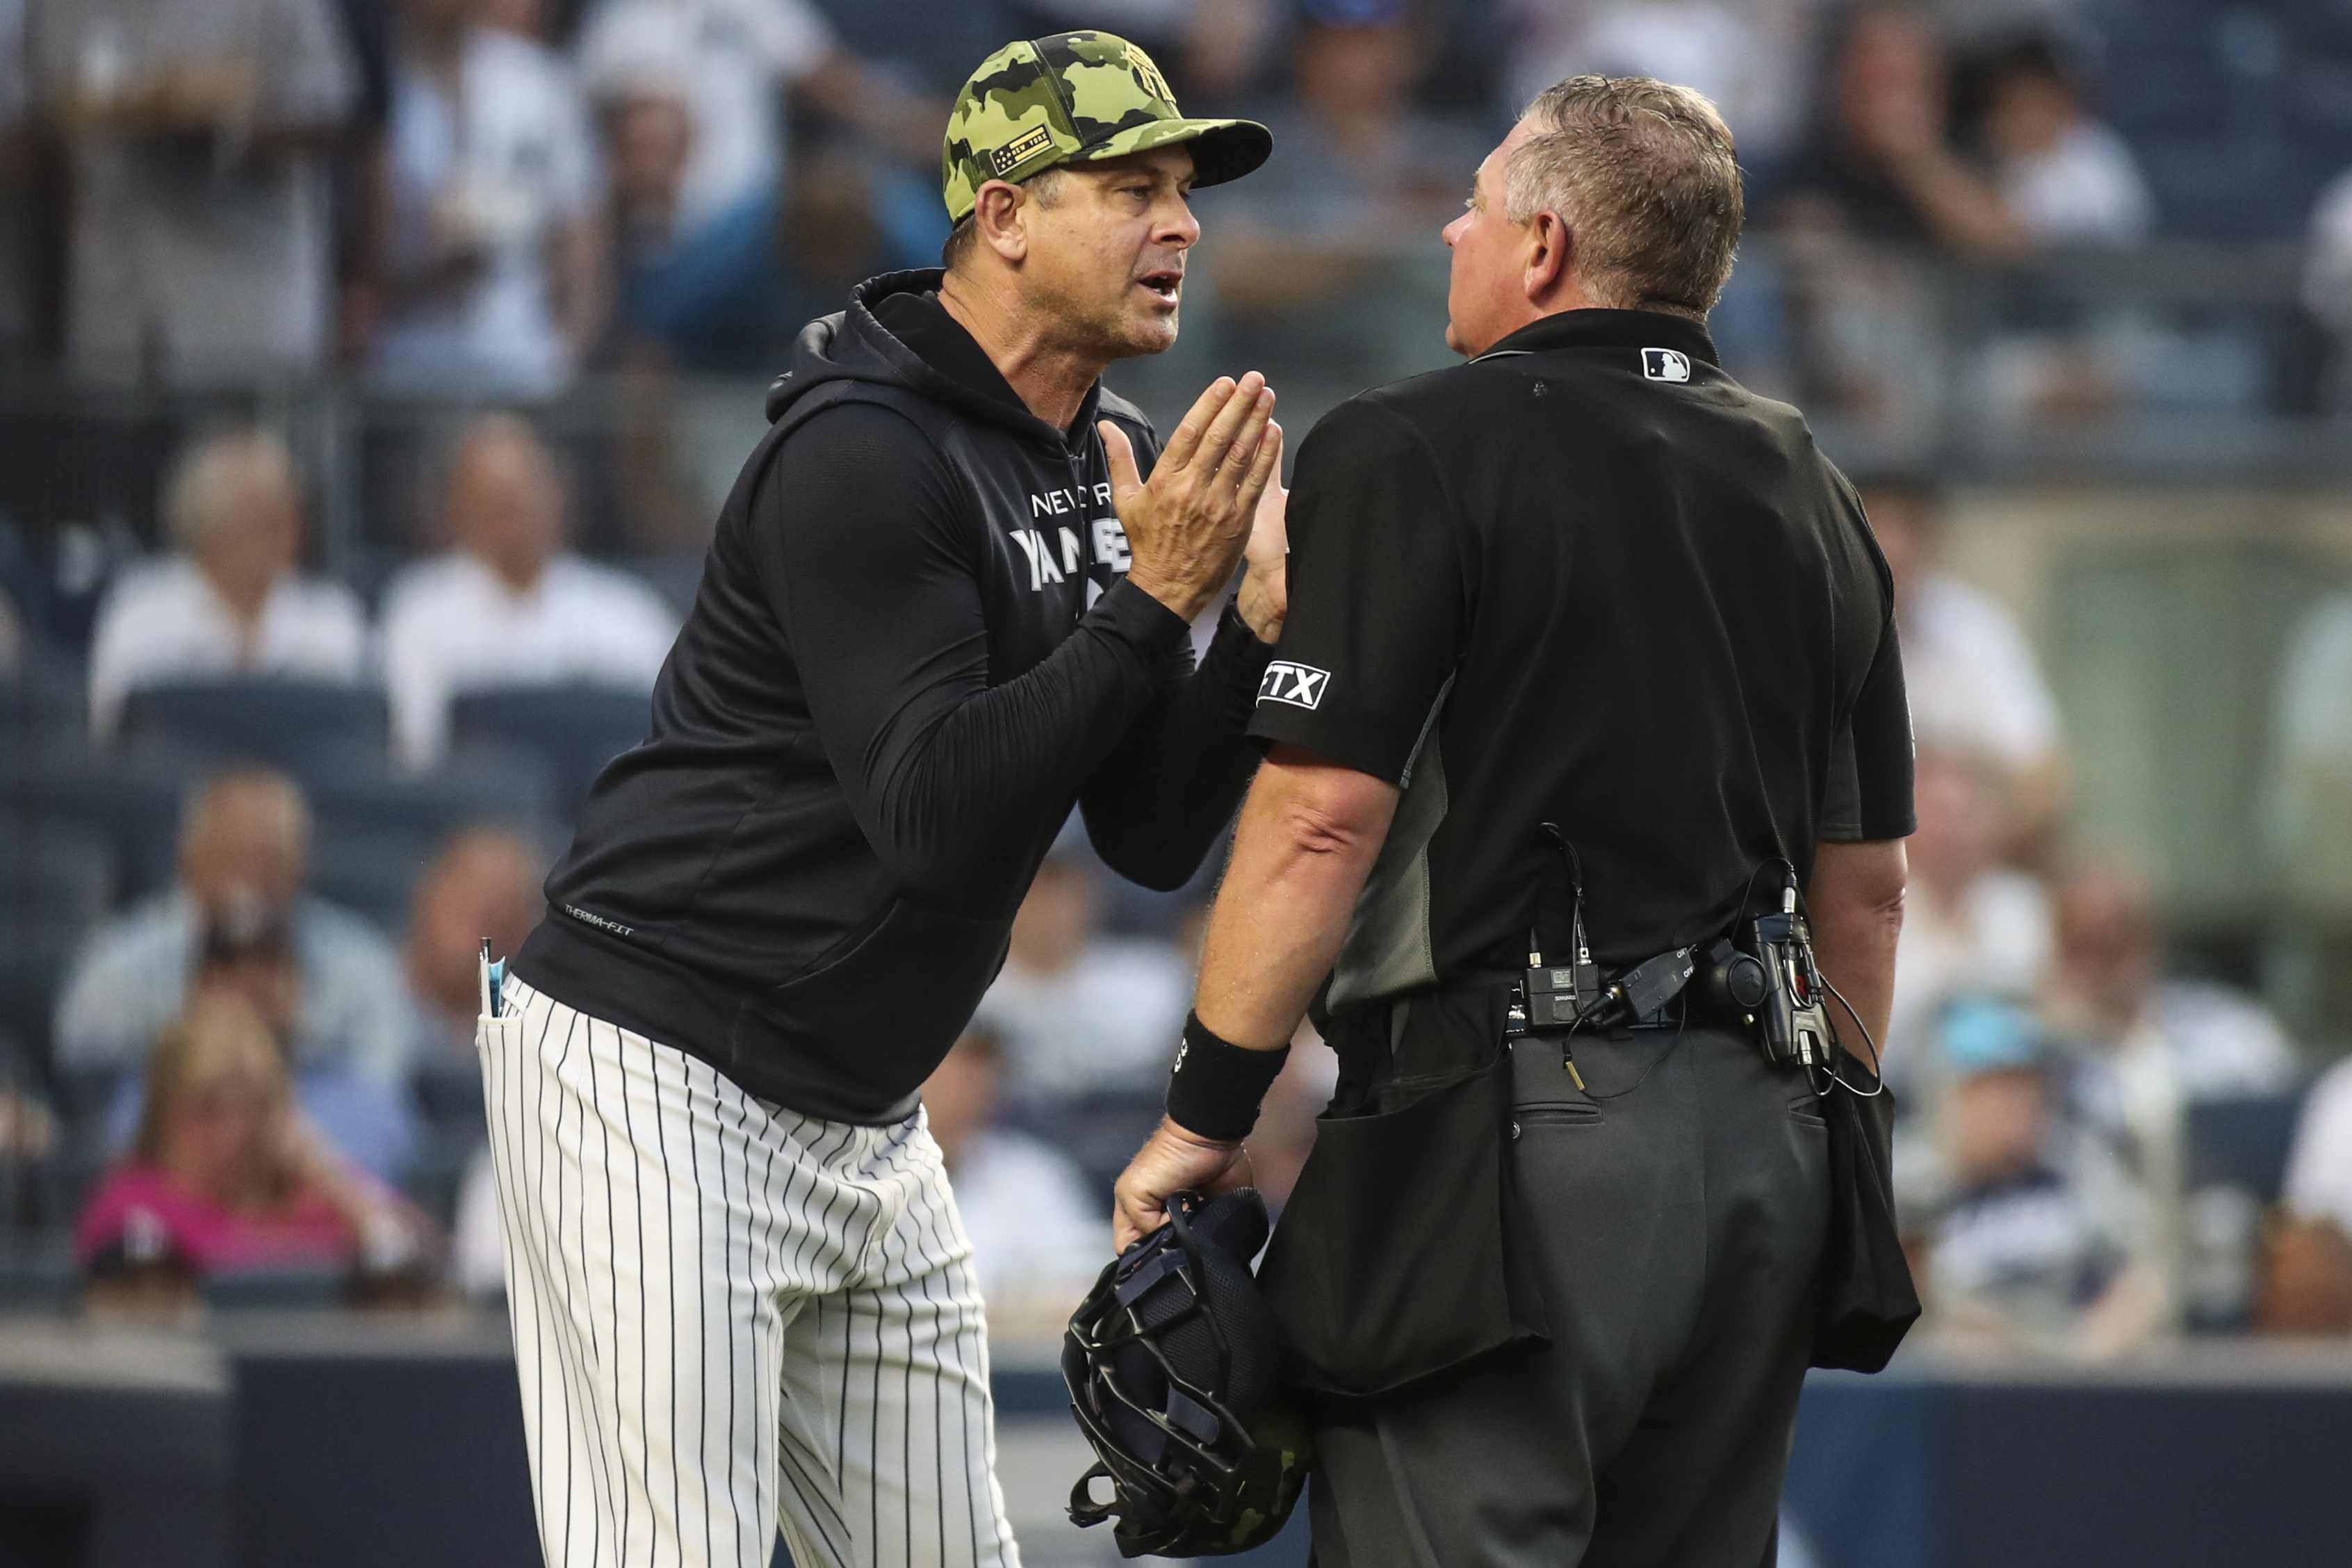 MLB: Game Two-Chicago White Sox at New York Yankees